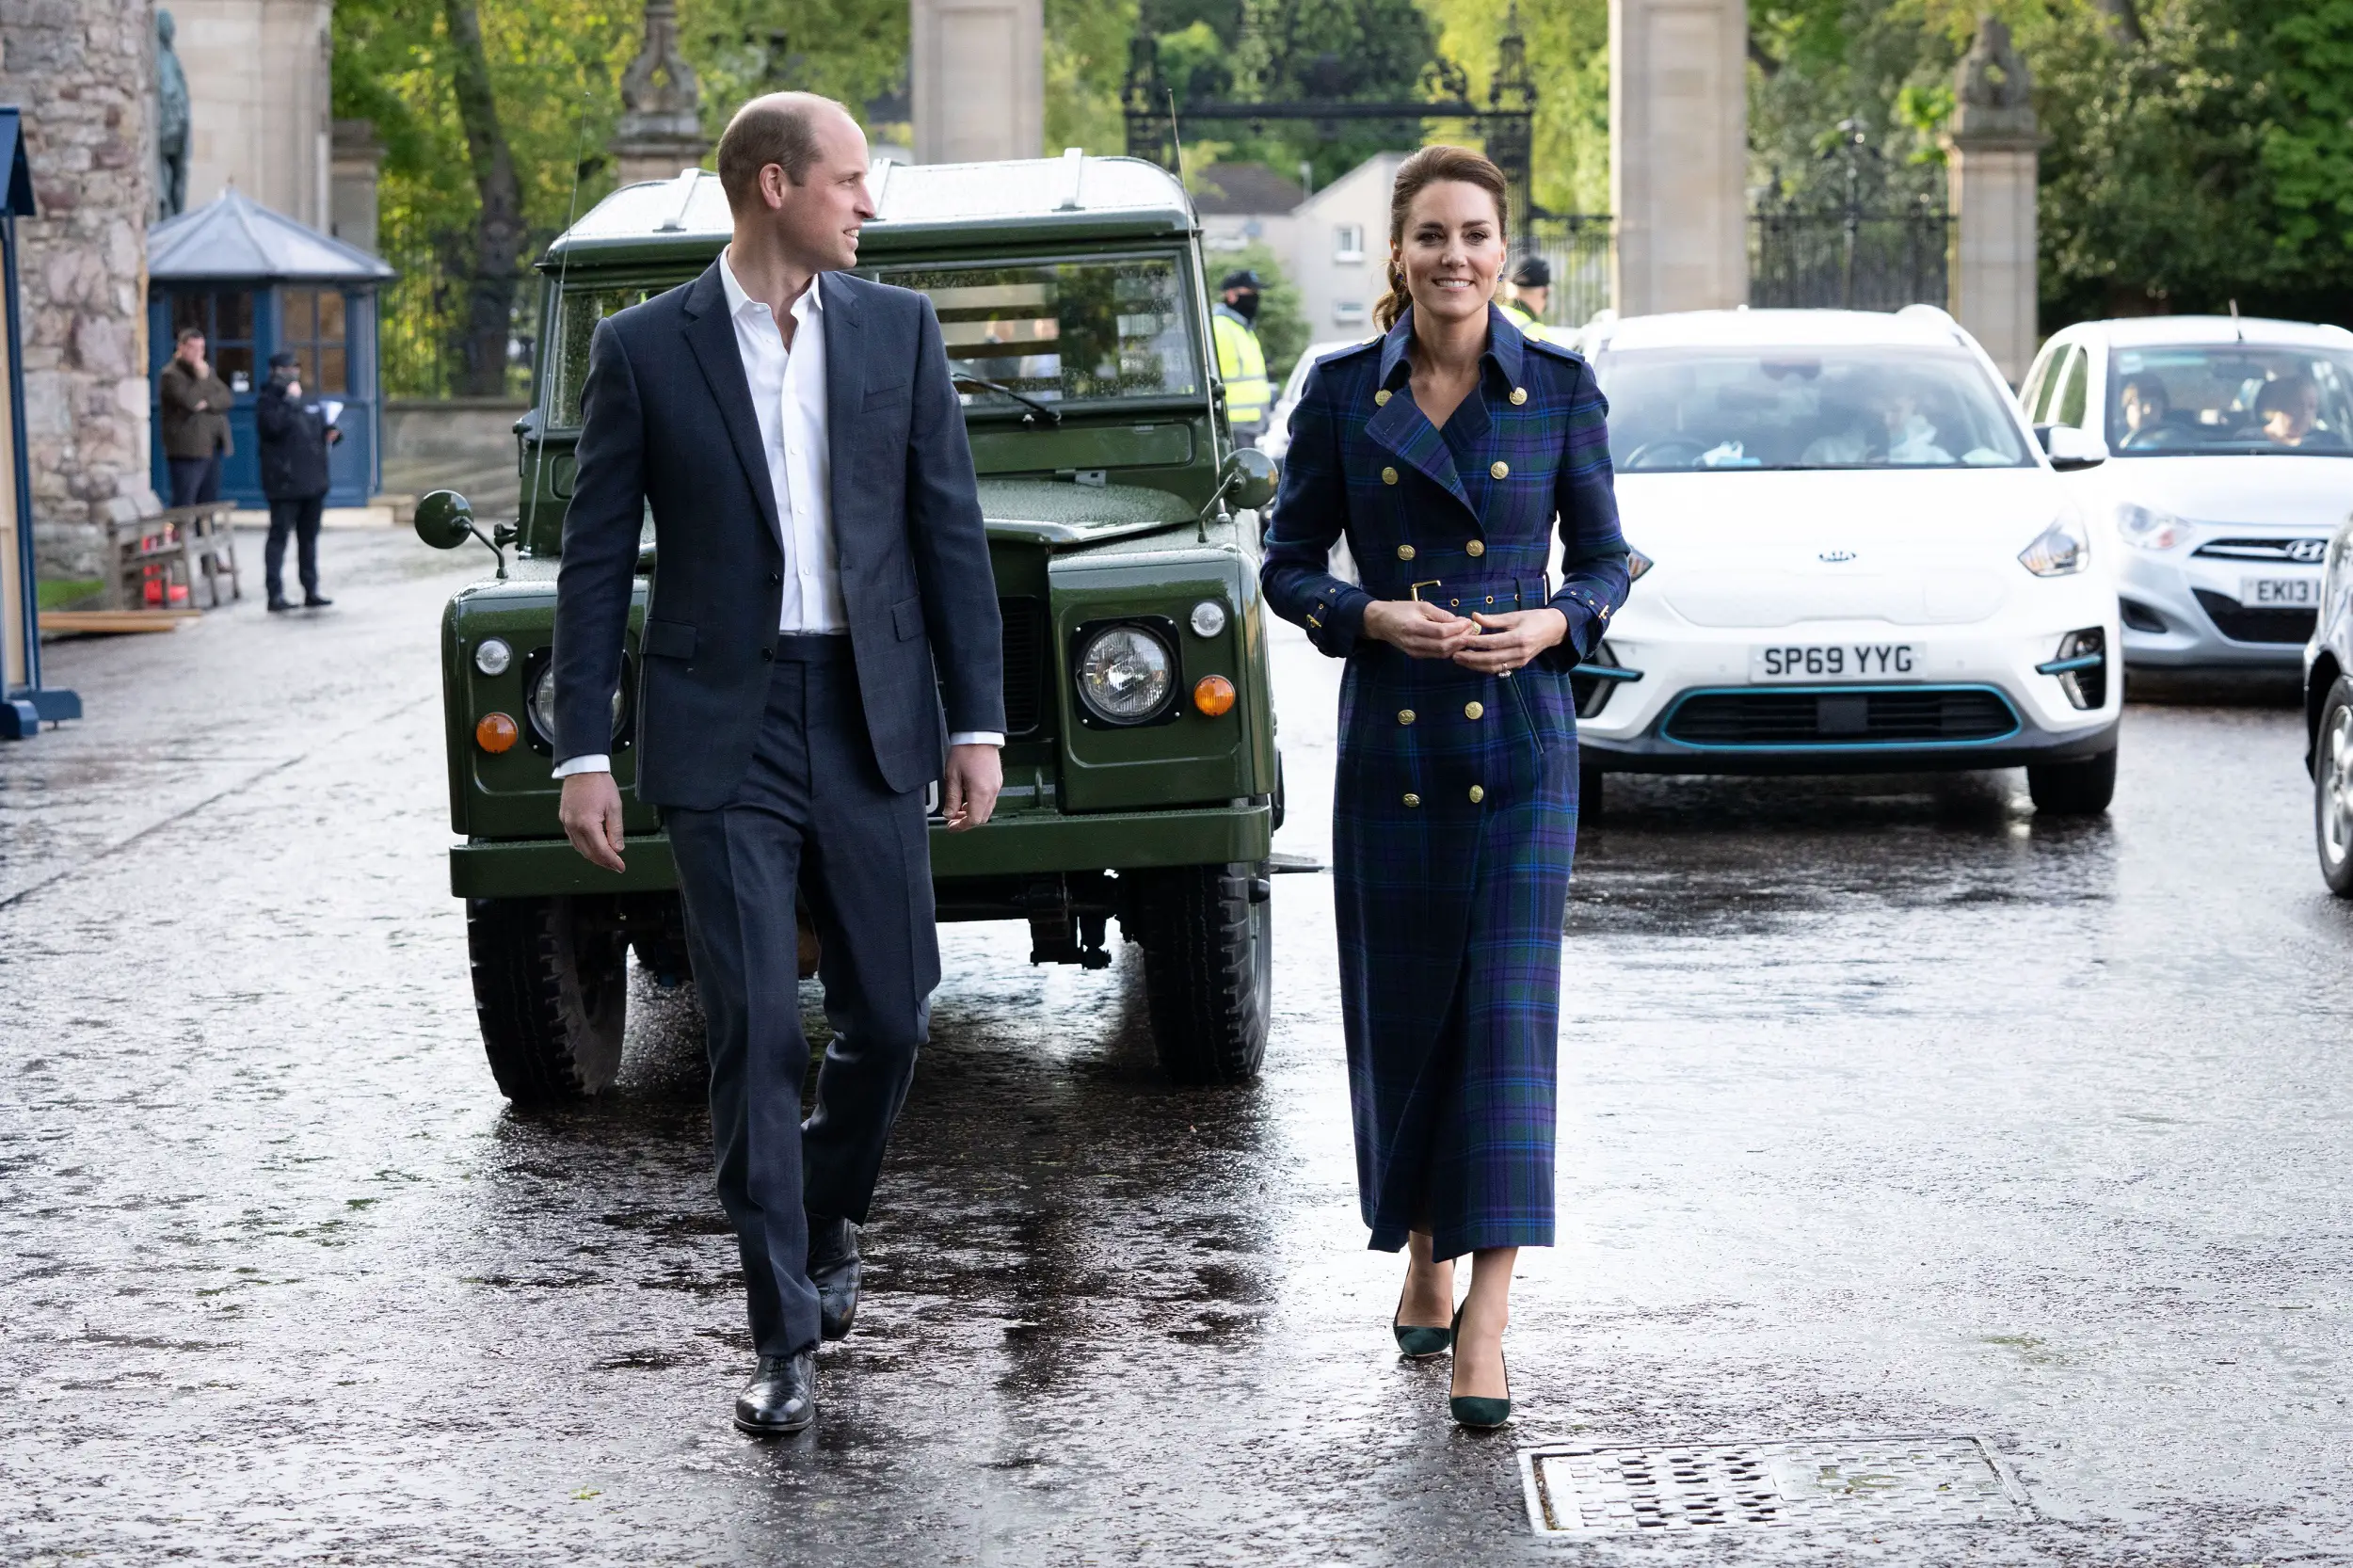 The Duke and Duchess of Cambridge hosted NHS staff at the Screening of Cruella